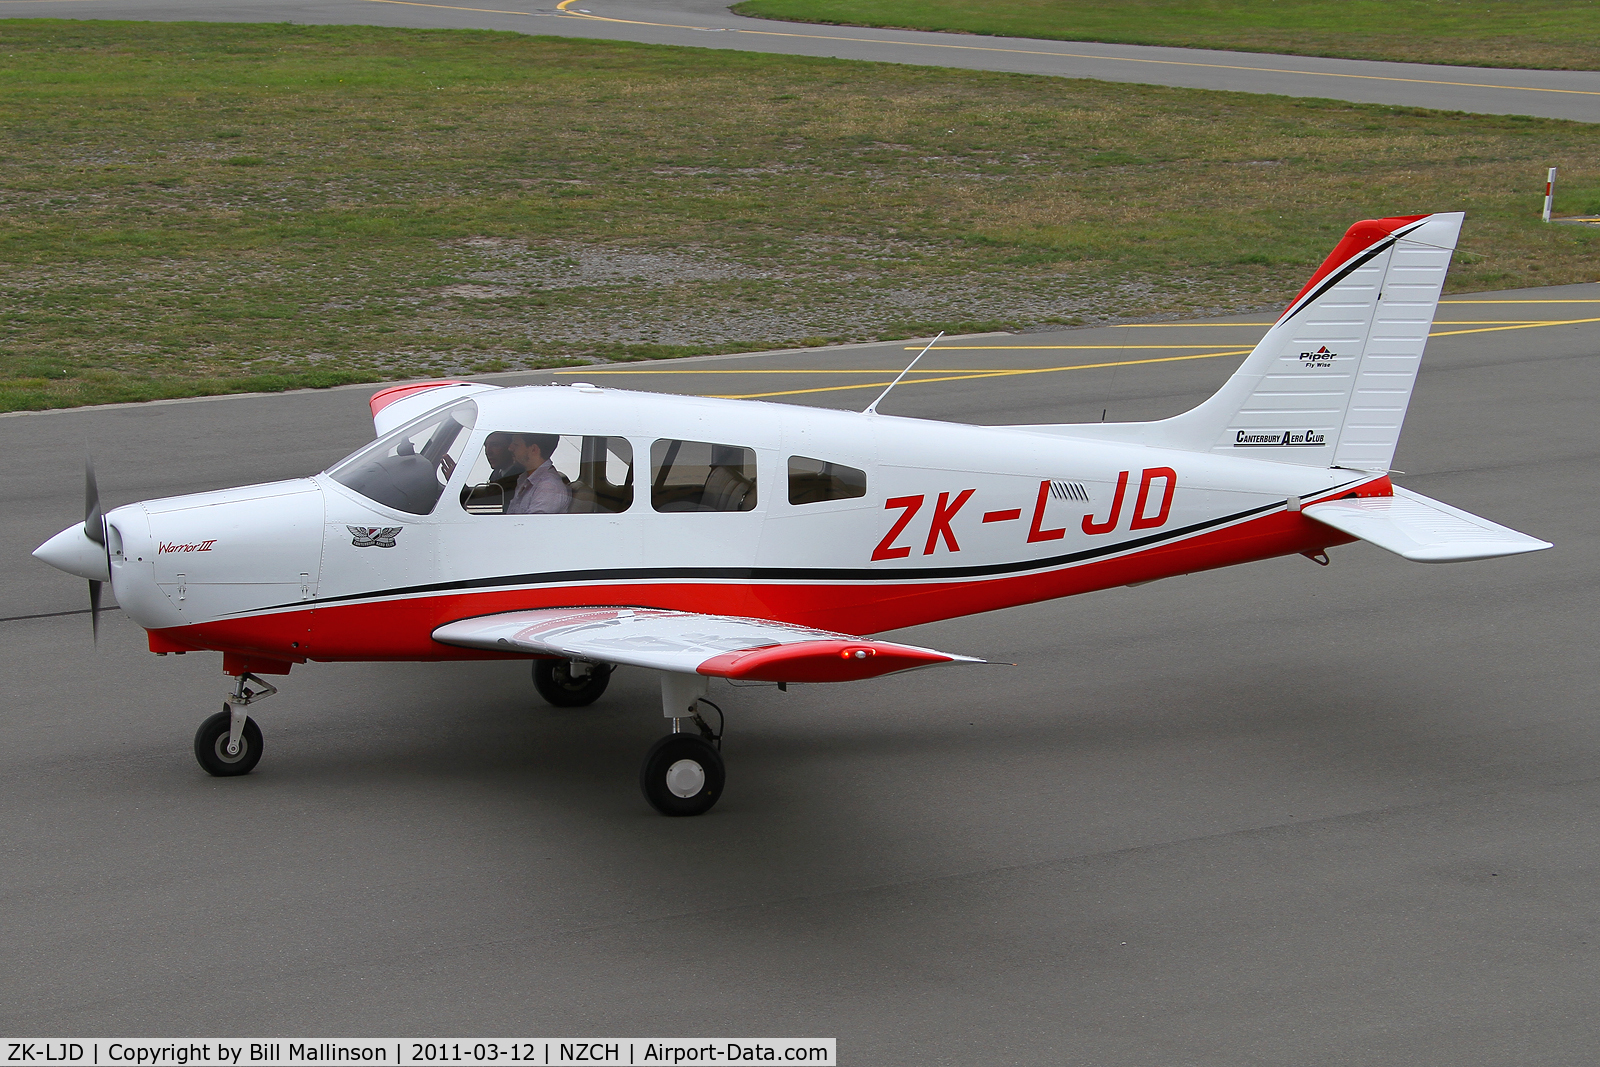 ZK-LJD, 2008 Piper PA-28-161 Cherokee Warrior II C/N 2842308, the only movement in 3 hours